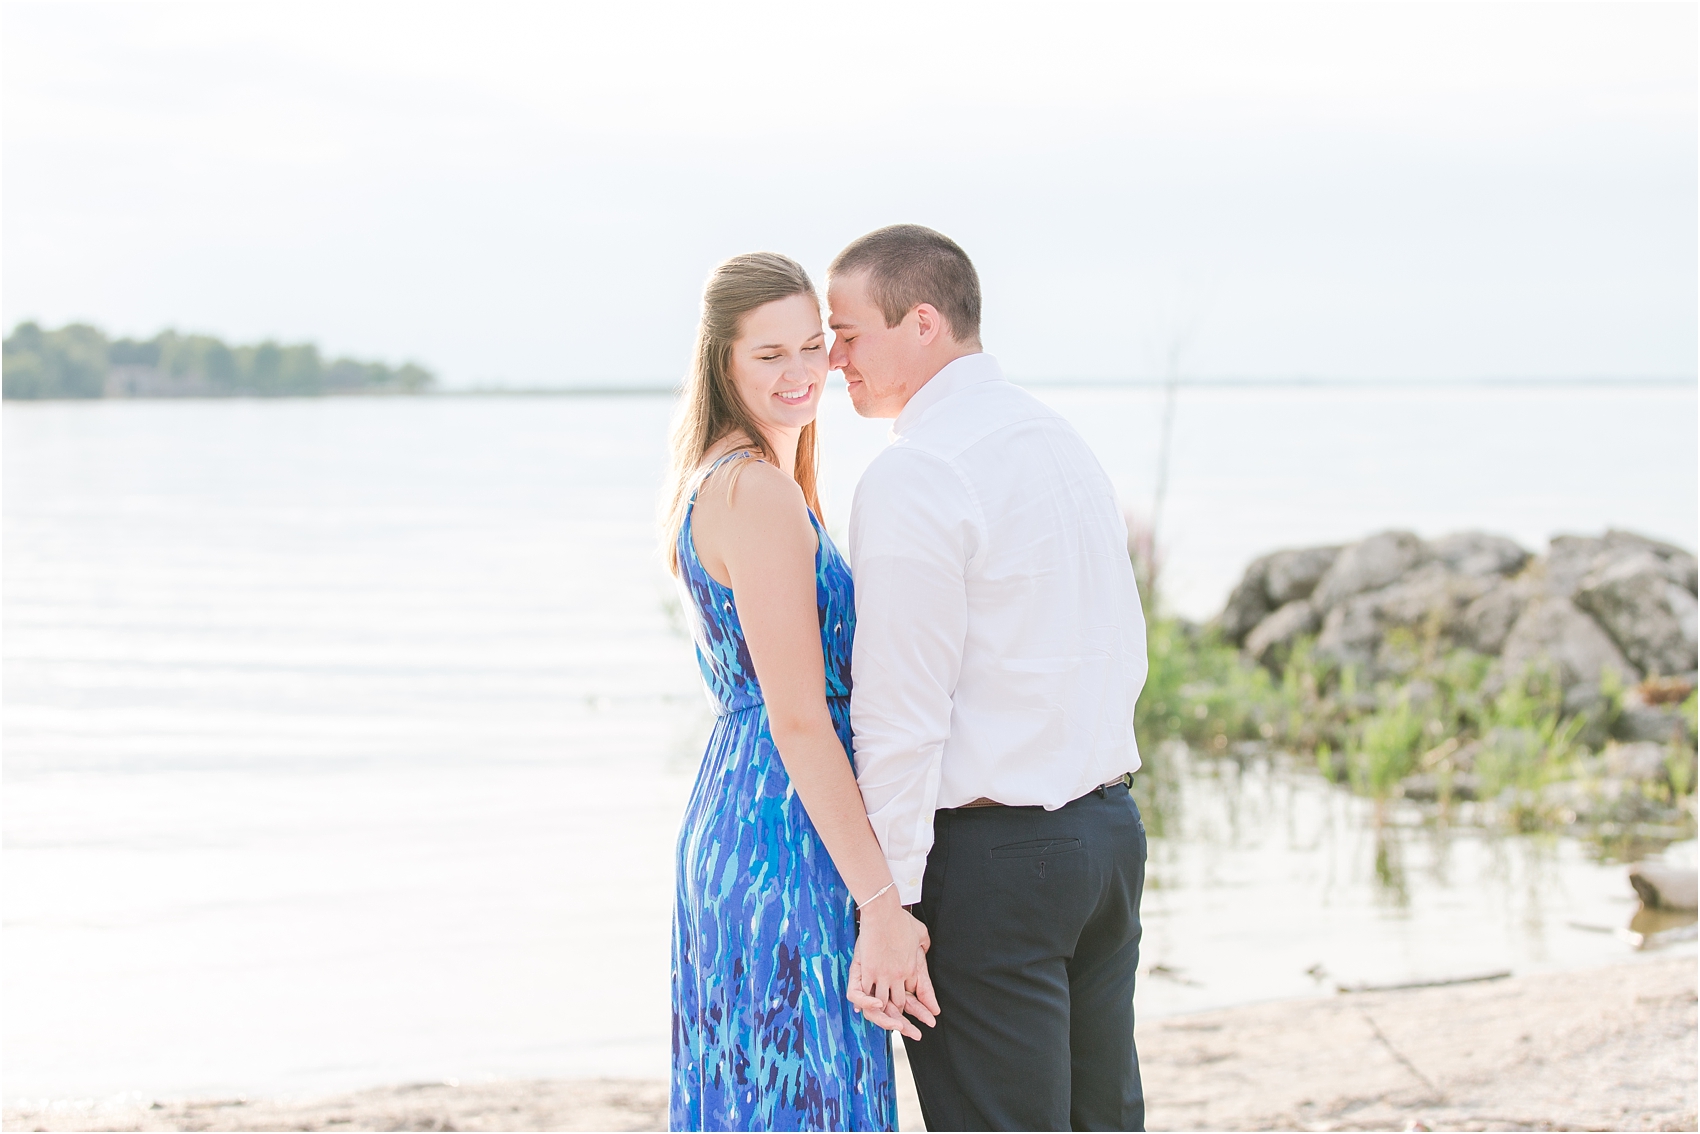 emotional-candid-romantic-engagement-photos-in-detroit-chicago-northern-michigan-by-courtney-carolyn-photography_0044.jpg